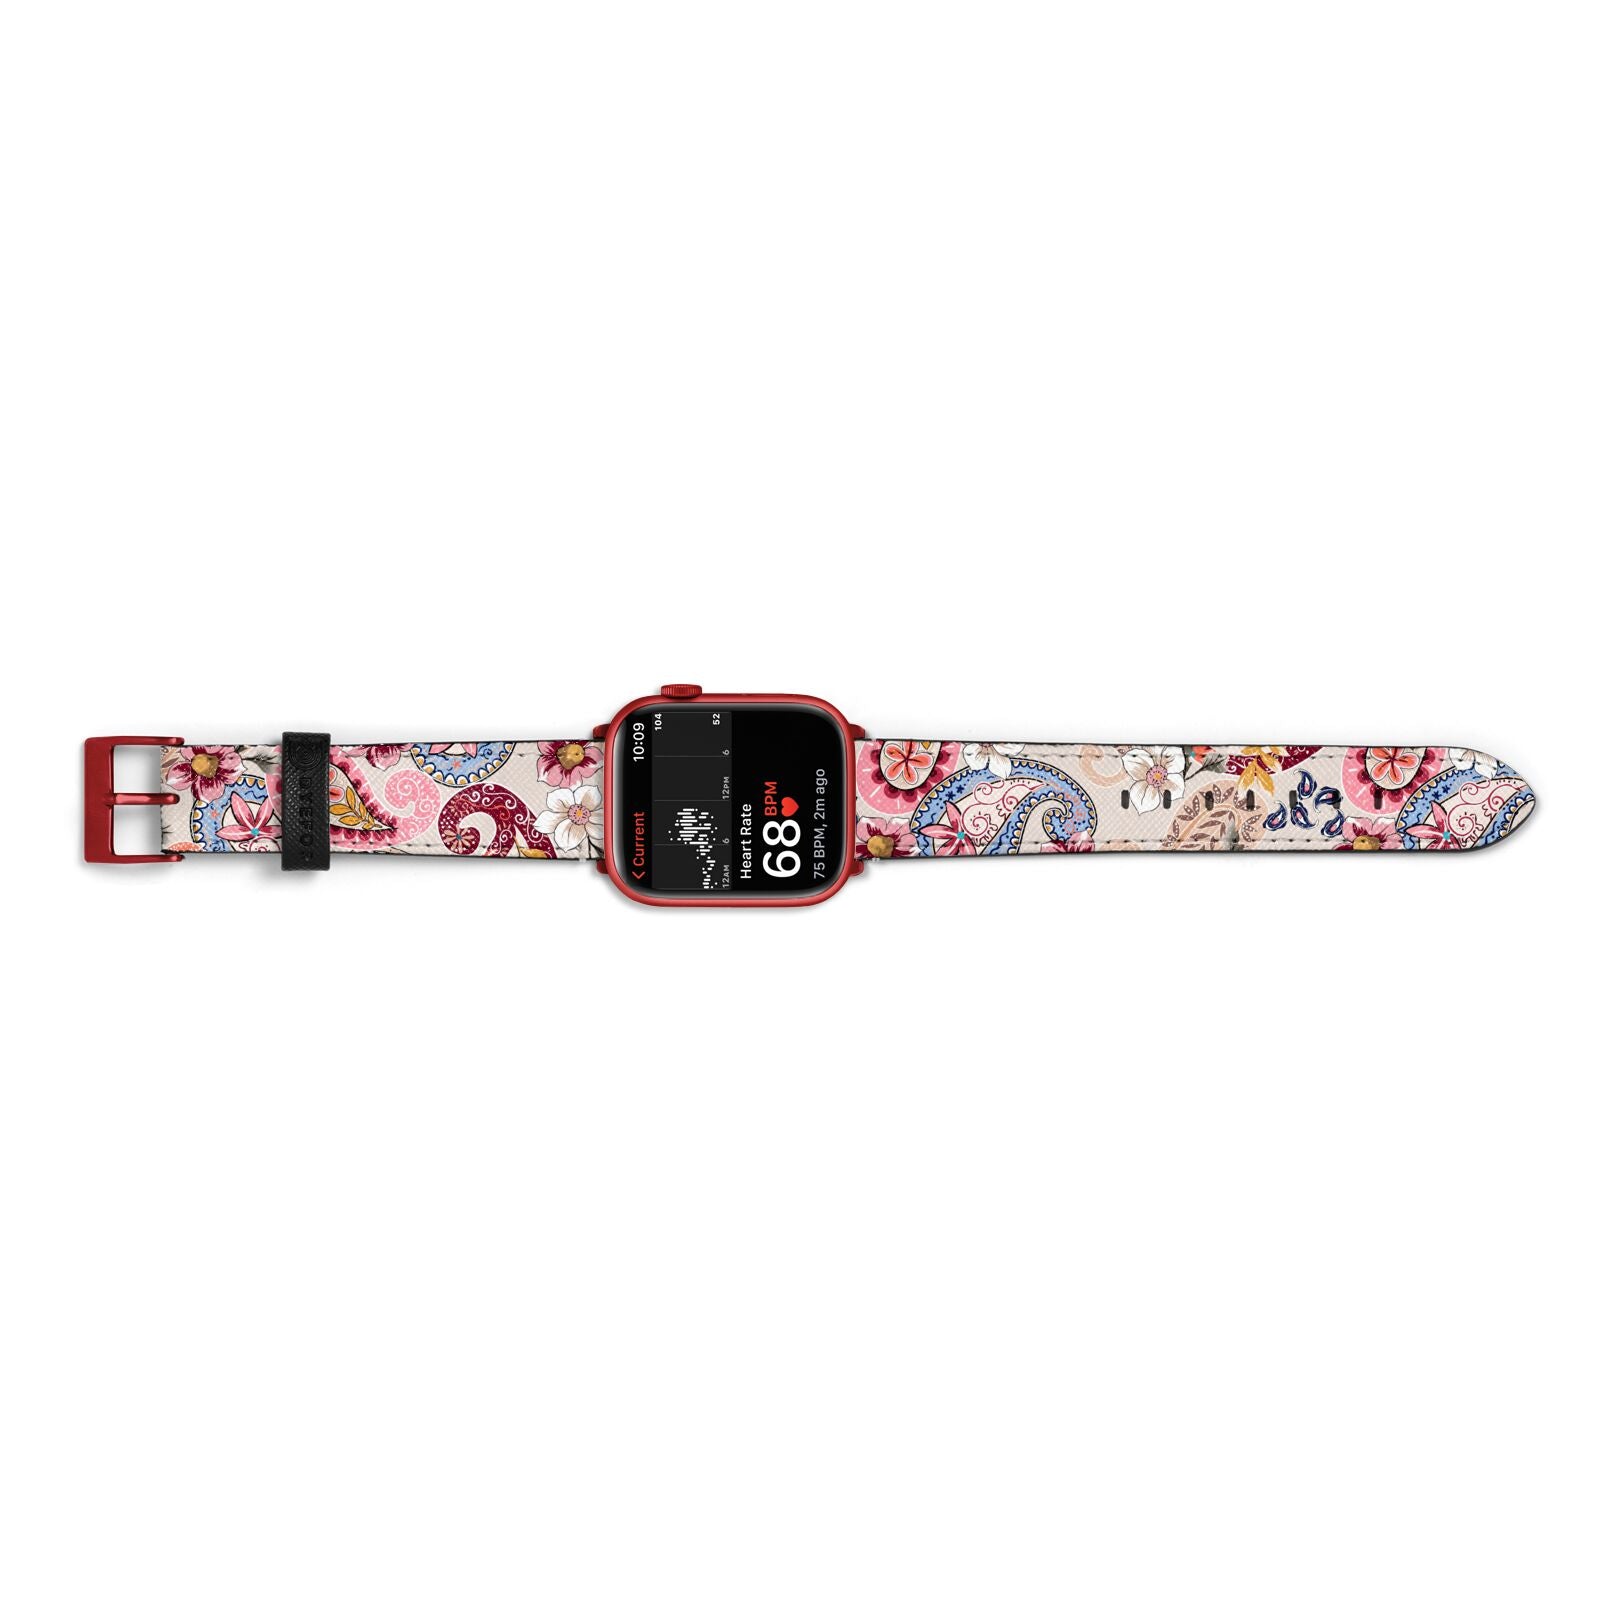 Paisley Cashmere Flowers Apple Watch Strap Size 38mm Landscape Image Red Hardware